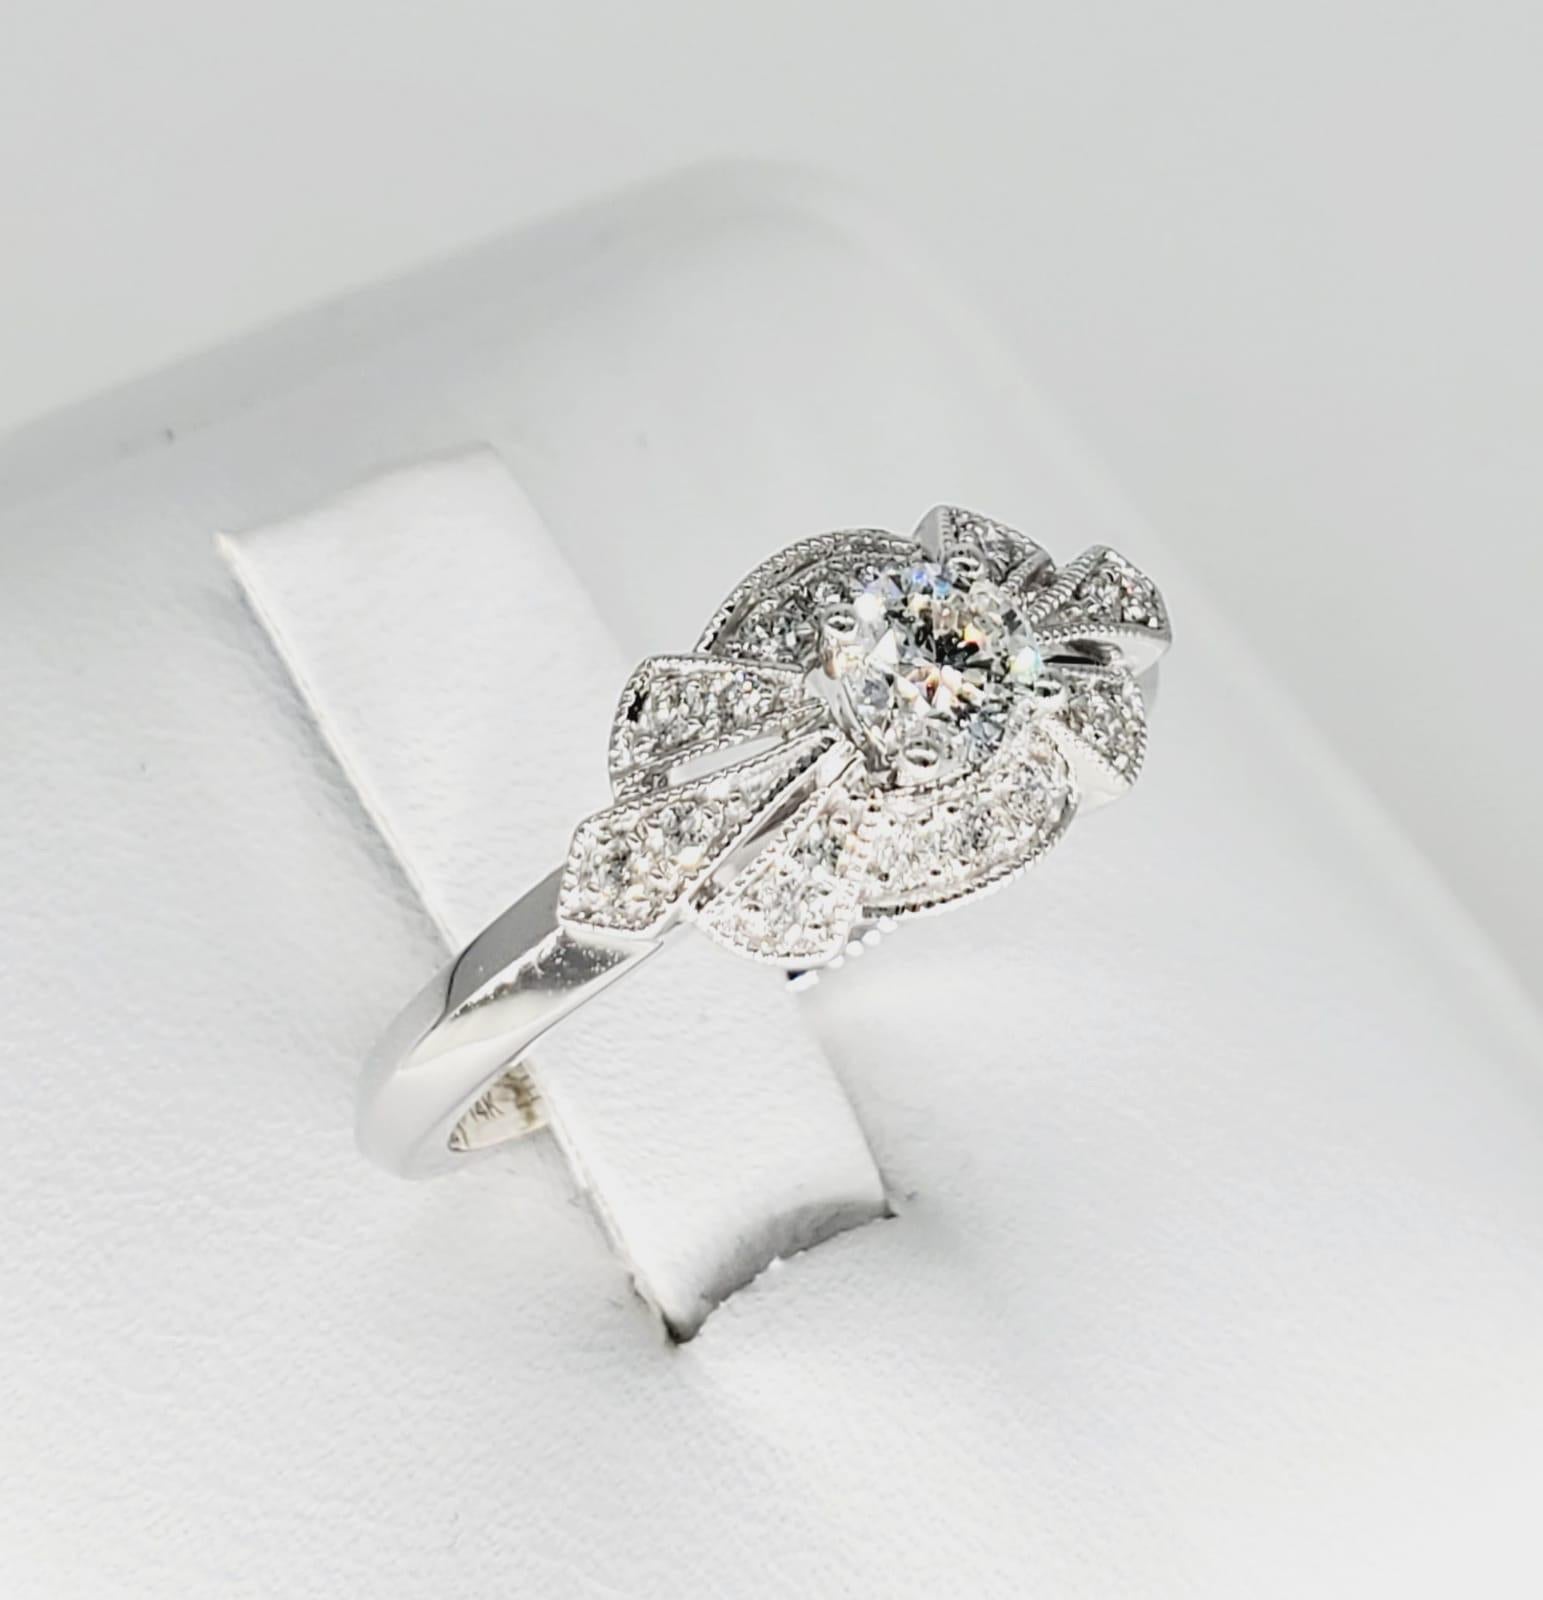 Zei 0.50 tcw Diamonds 14k White Gold Engagement Ring. Beautifully mastered design making the center diamond standout without hiding any beauty from the diamonds surrounding it. The ring is made by famous jewelry maker Zei and has an Art Deco Style